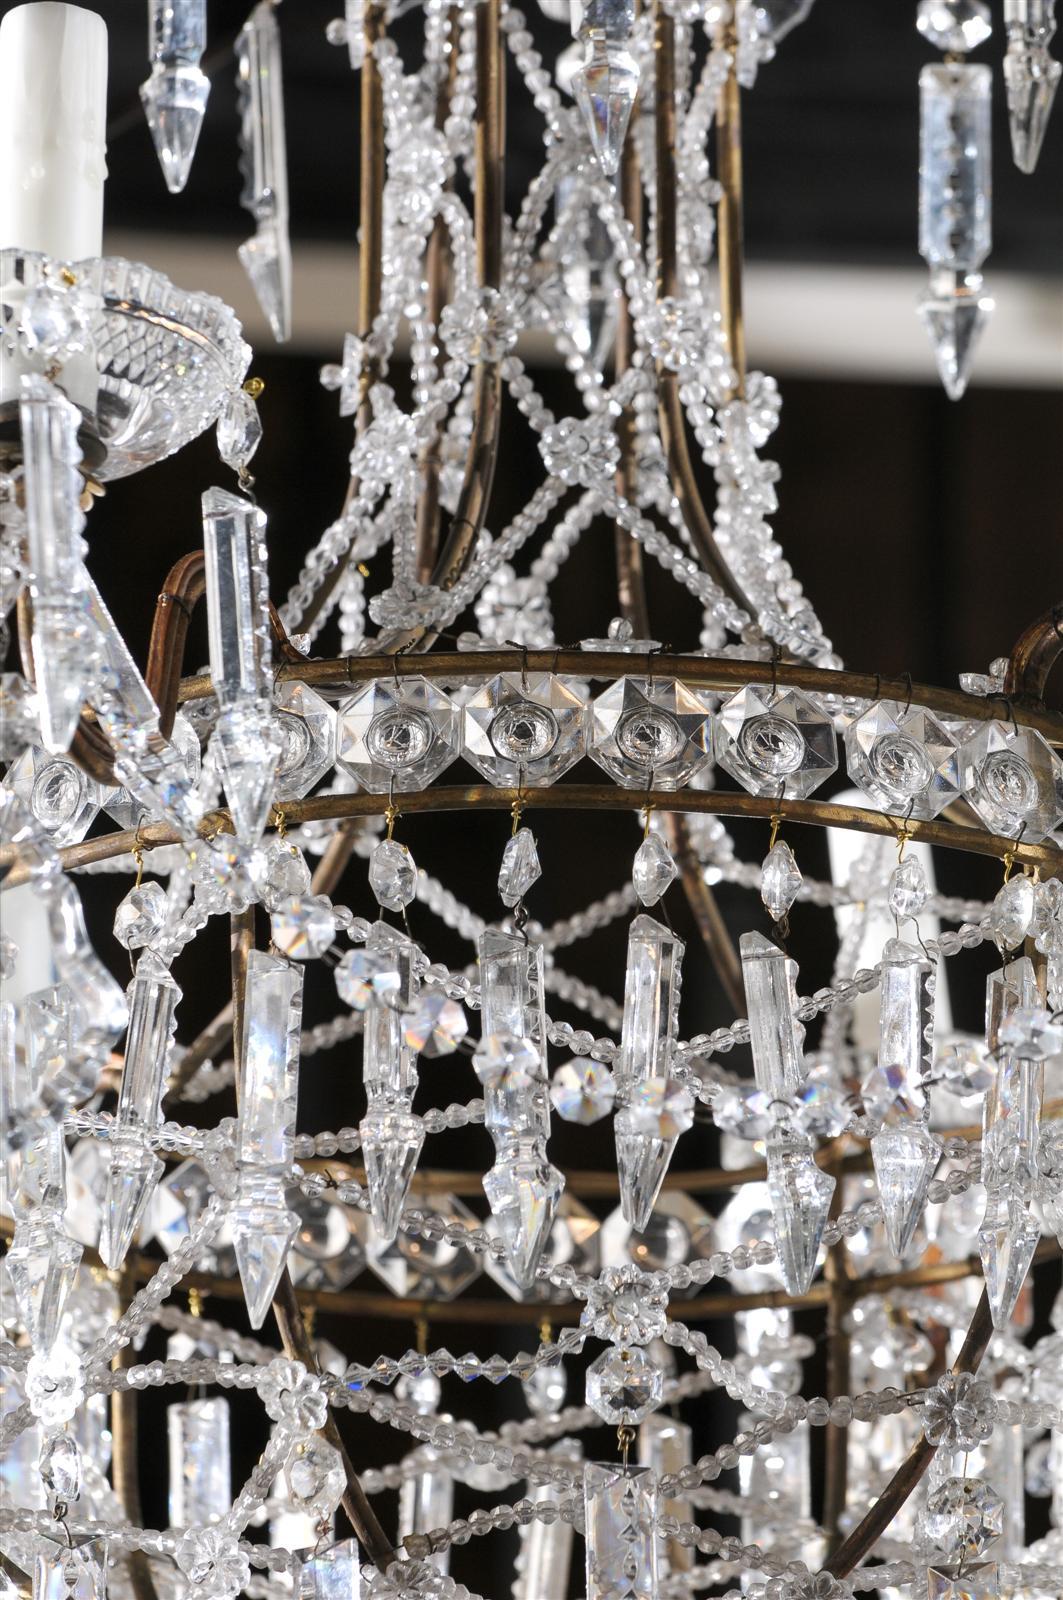 Italian Six-Light Crystal Basket Chandelier from the Early 20th Century For Sale 4